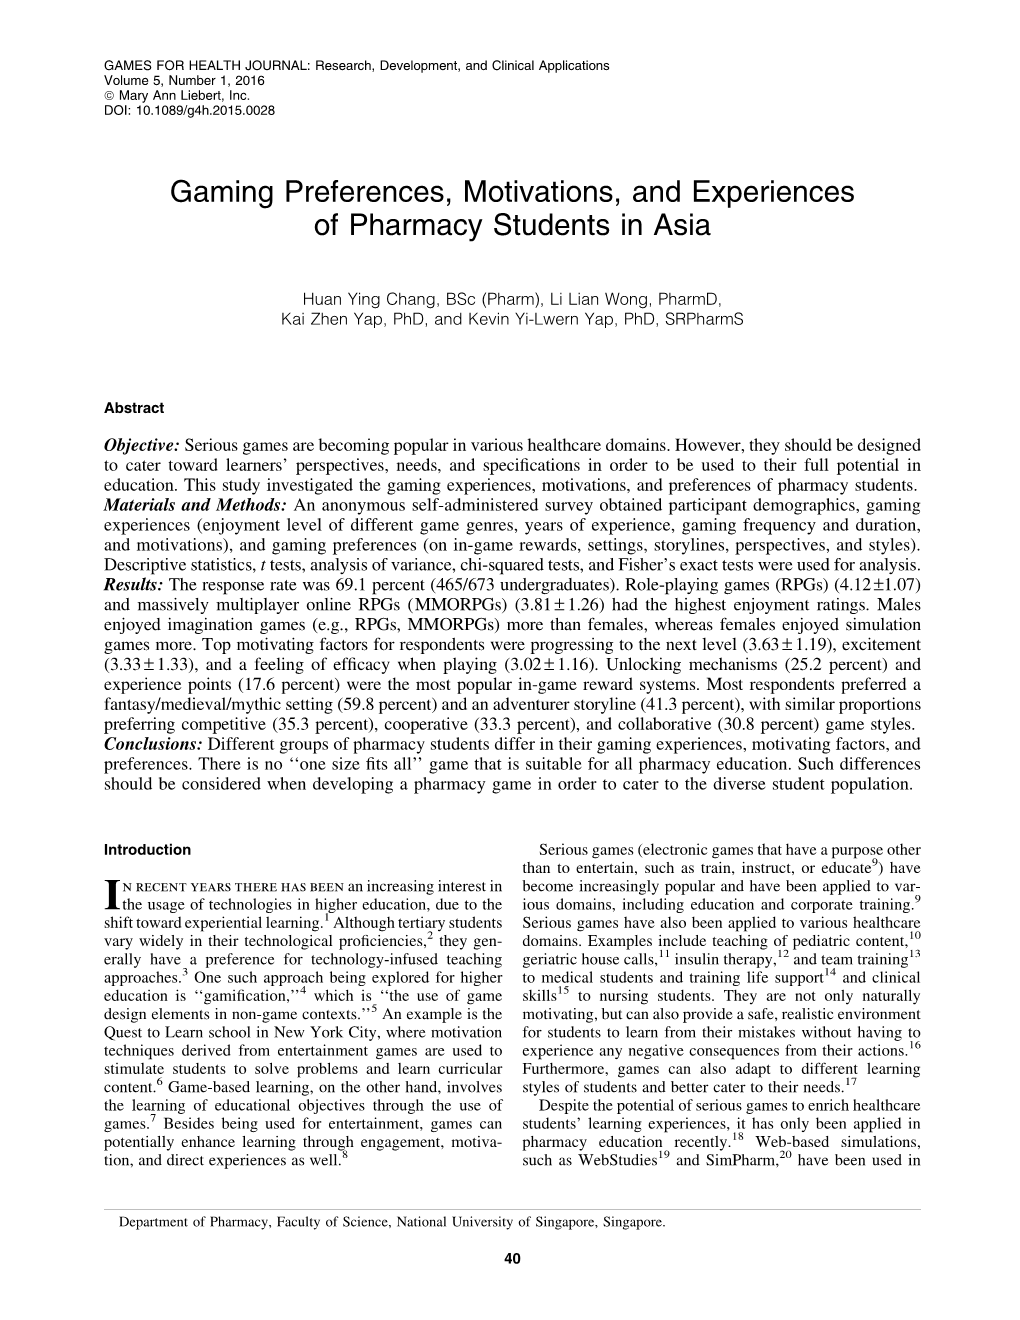 Gaming Preferences, Motivations, and Experiences of Pharmacy Students in Asia